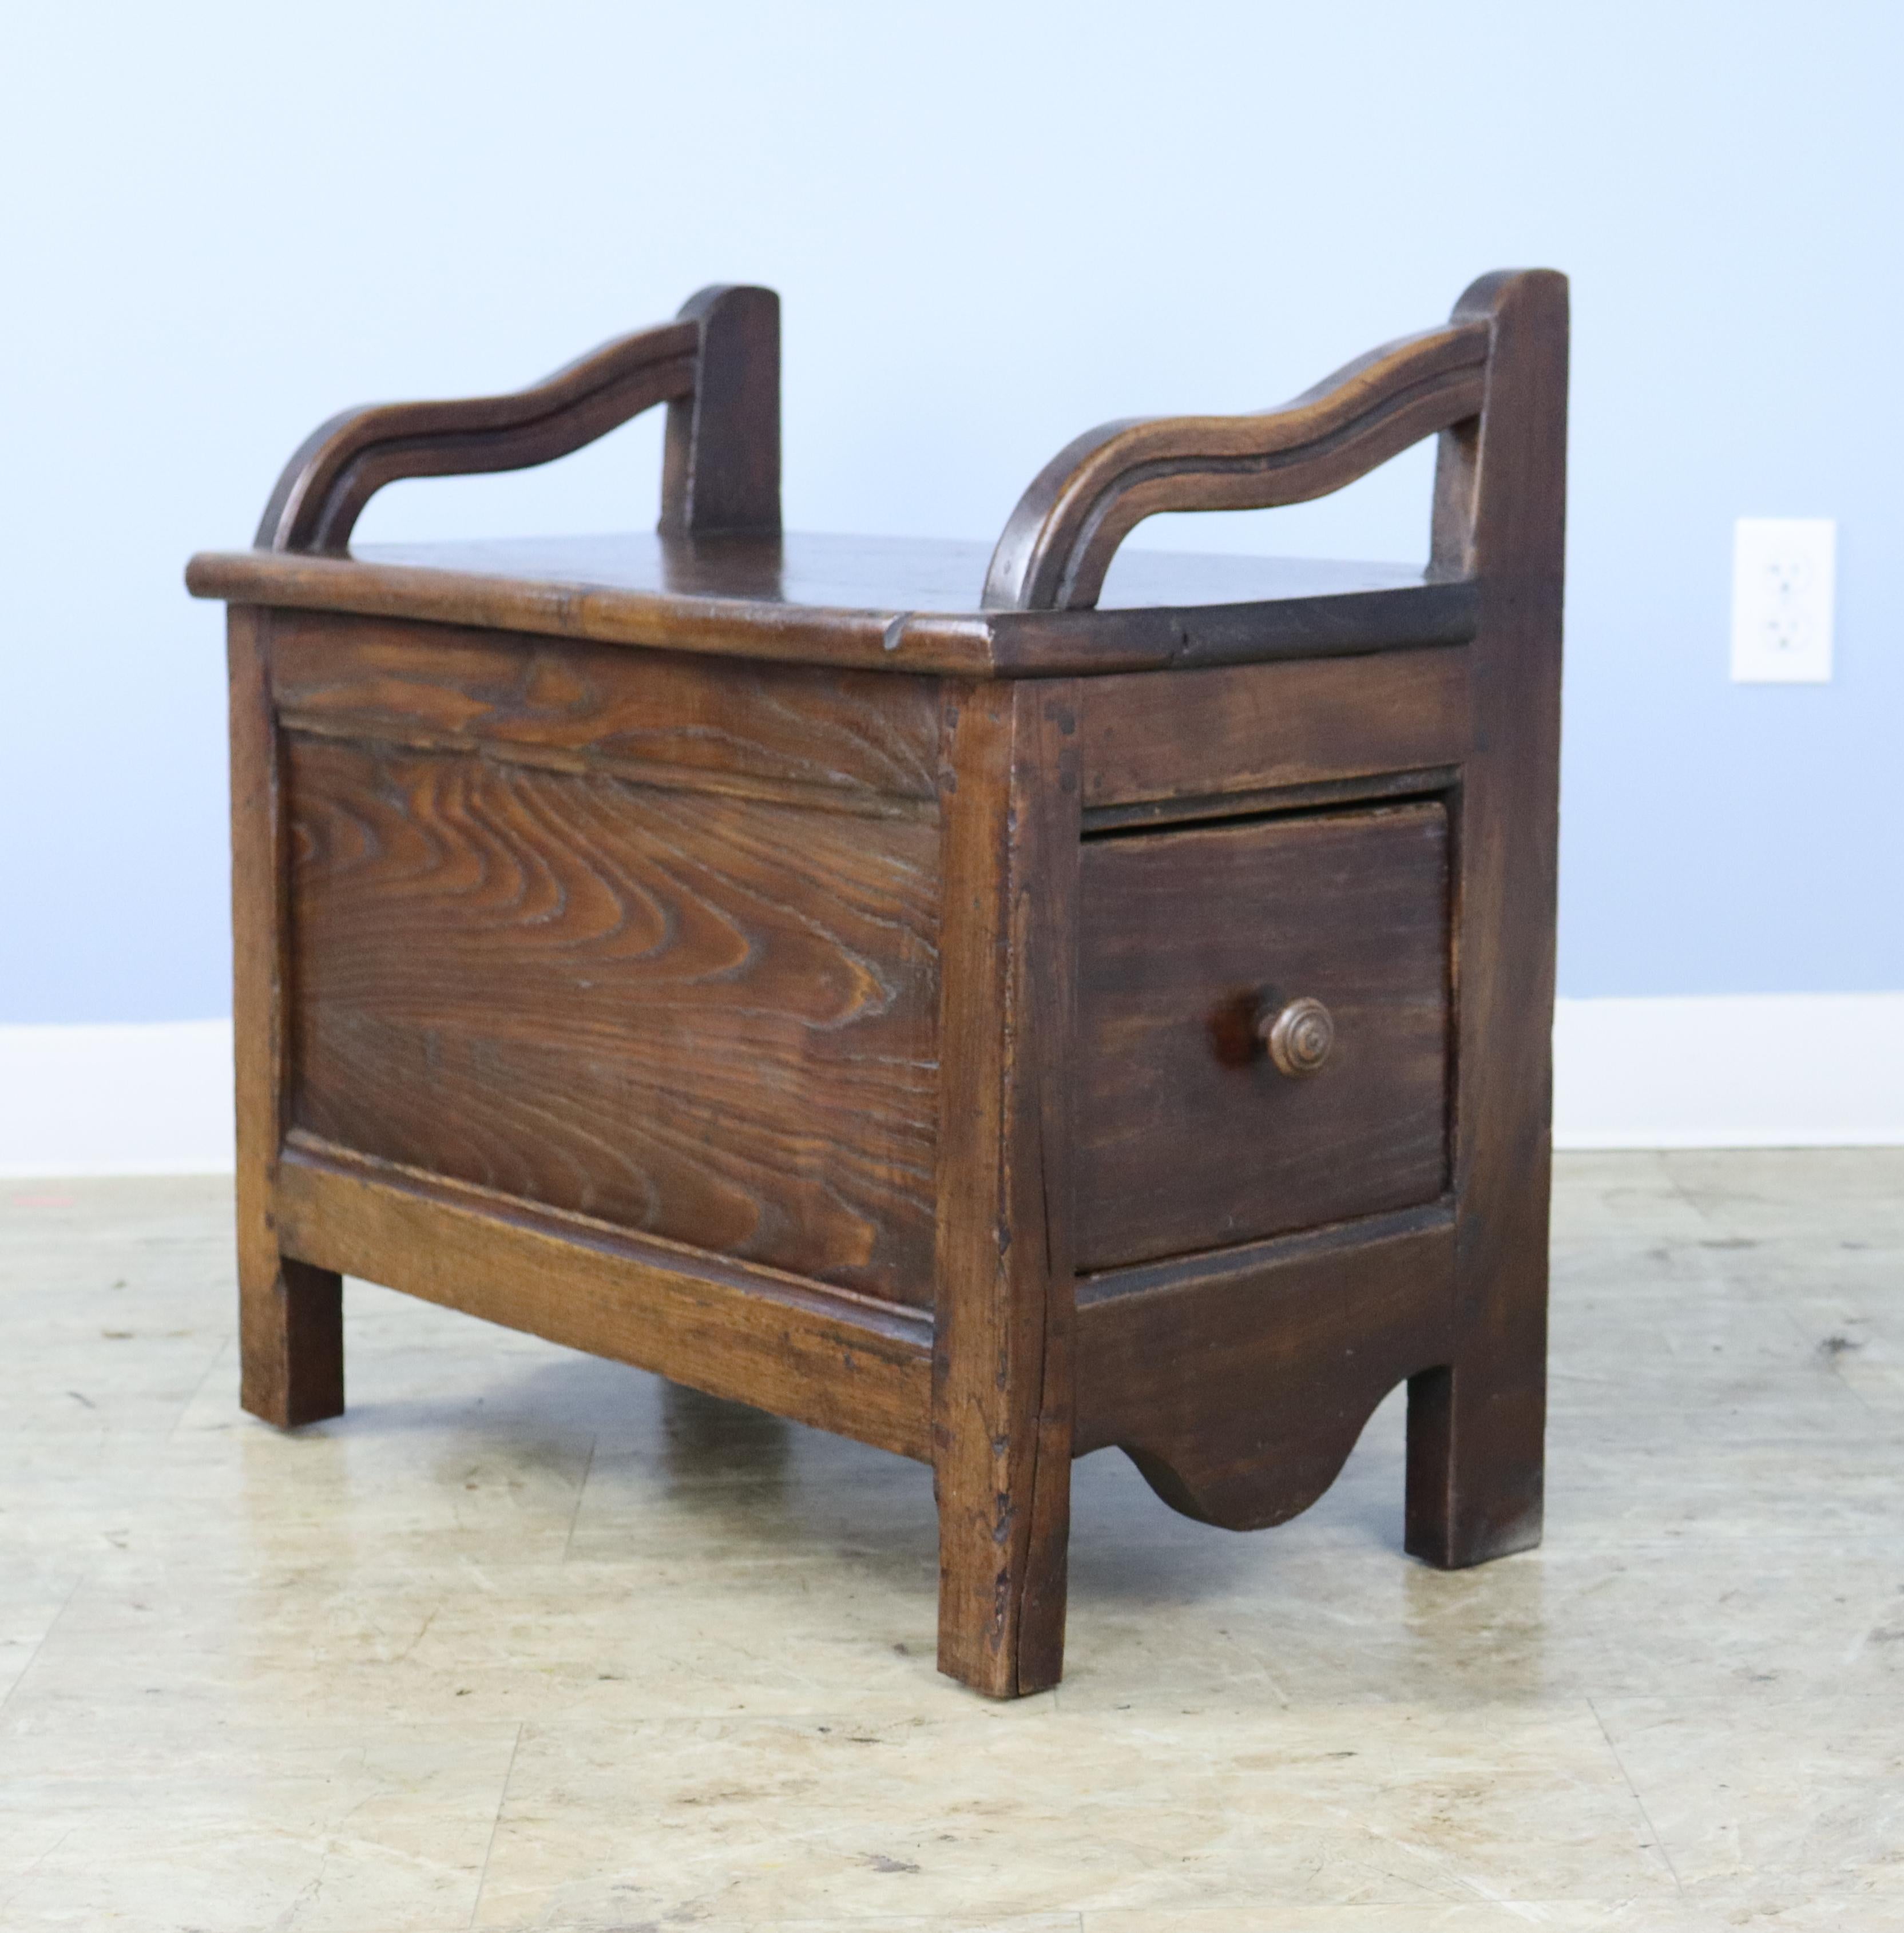 A small fireside seat in warm chestnut with a side drawer that reveals an good storage space.  Attractive curved arms  add a note of charm.  If you are in need of two, we have a similar piece with a side drawer, reference #0623-016A.